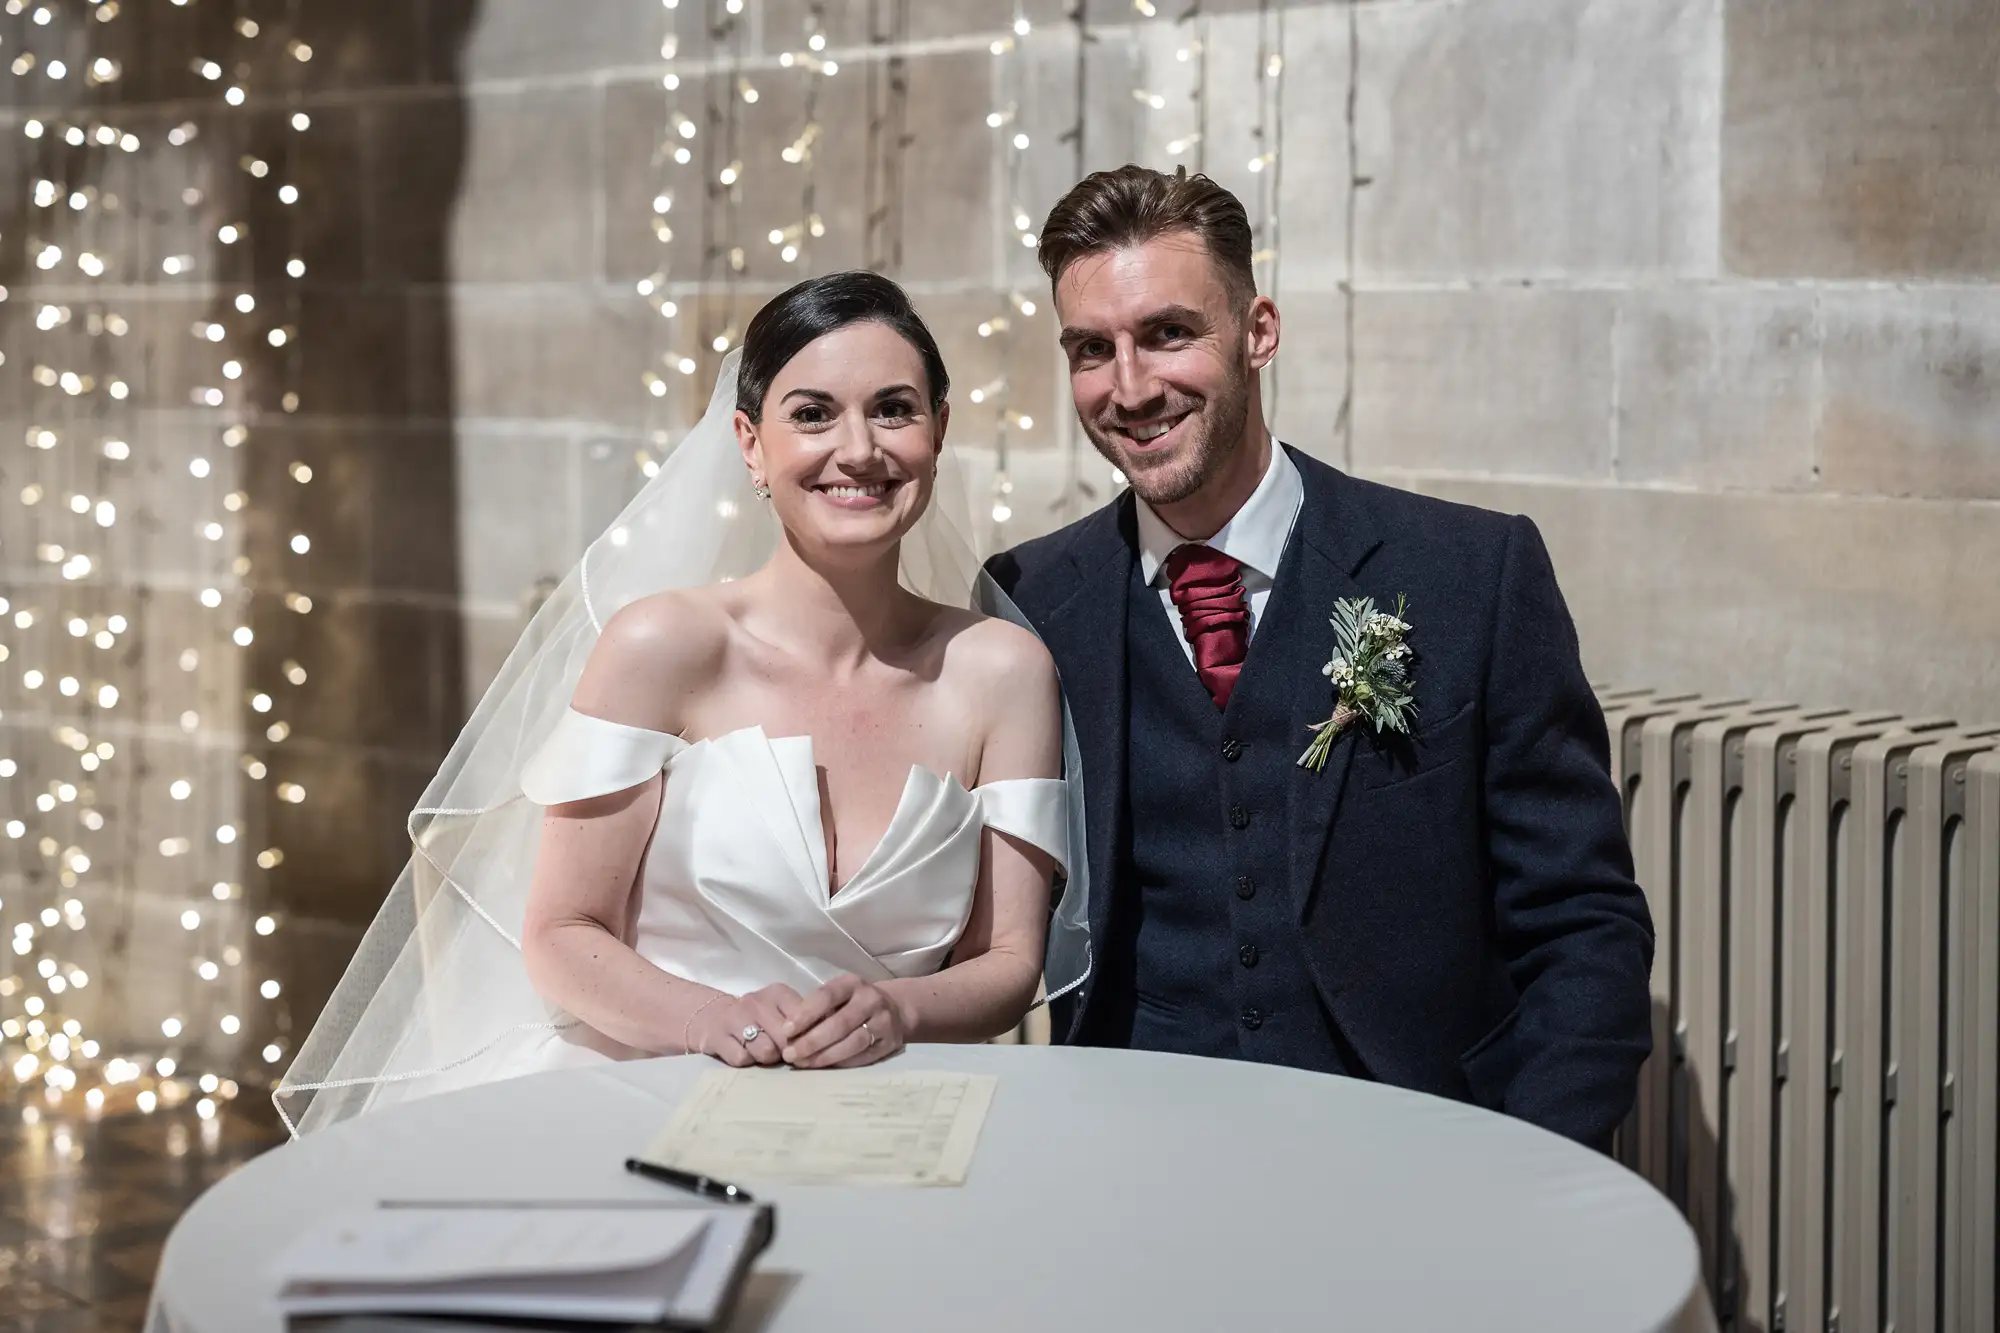 A bride in a white dress and a groom in a dark suit smile happily at a signing table, with a backdrop of twinkling lights.